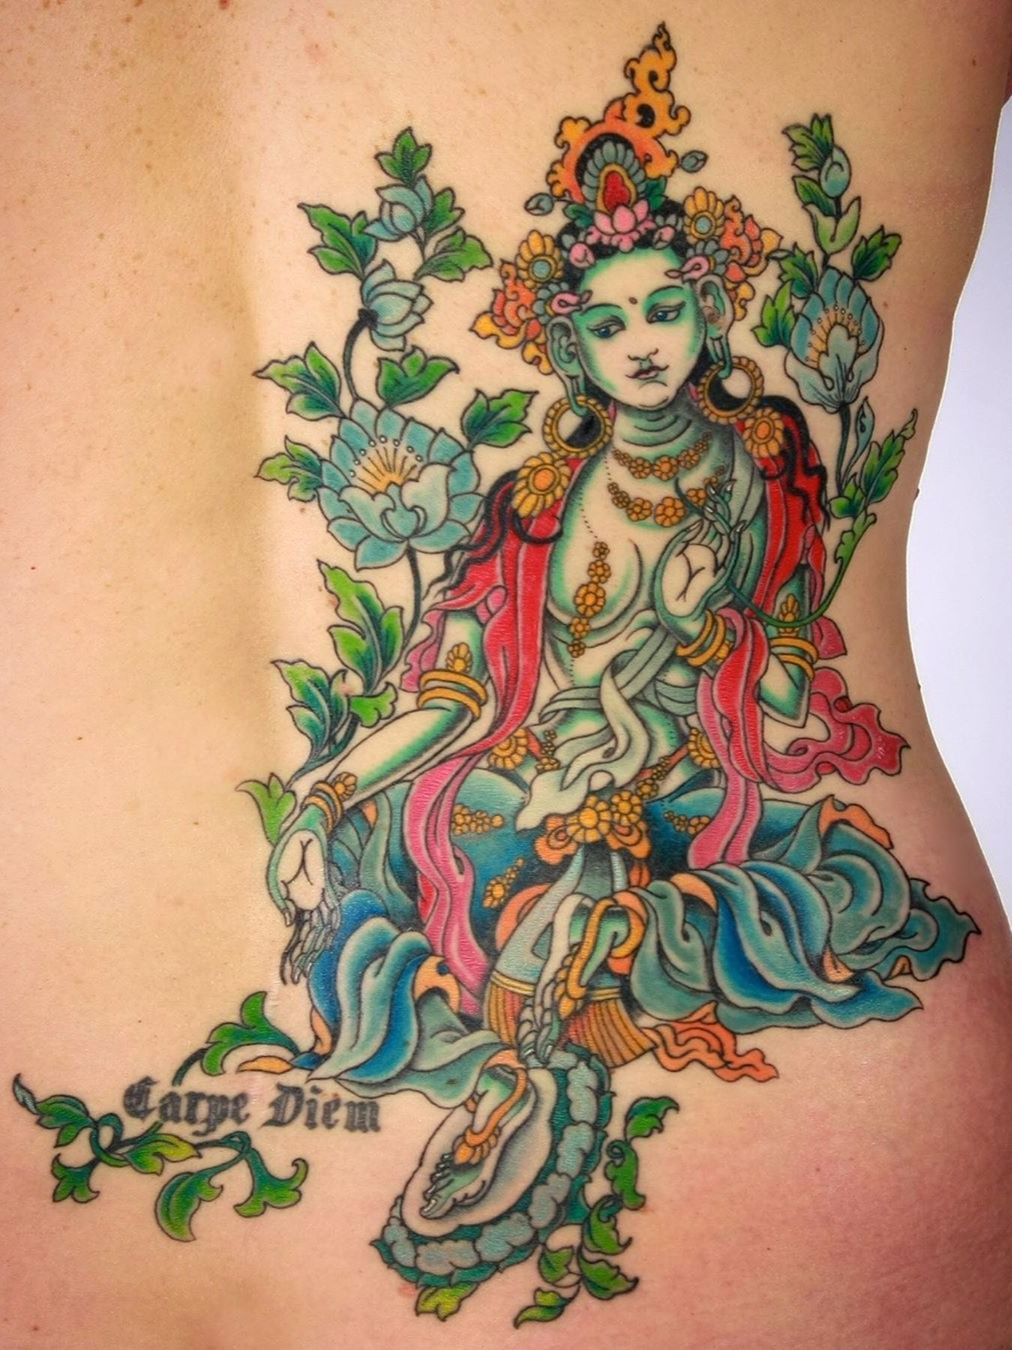 Cine Rōnin on Twitter got a new tattoo Green Tara Mantra Om Tare Tuttare  Ture Soha provides protection from physical mental and spiritual suffering  httpstcoQWkx9zw9FA  Twitter